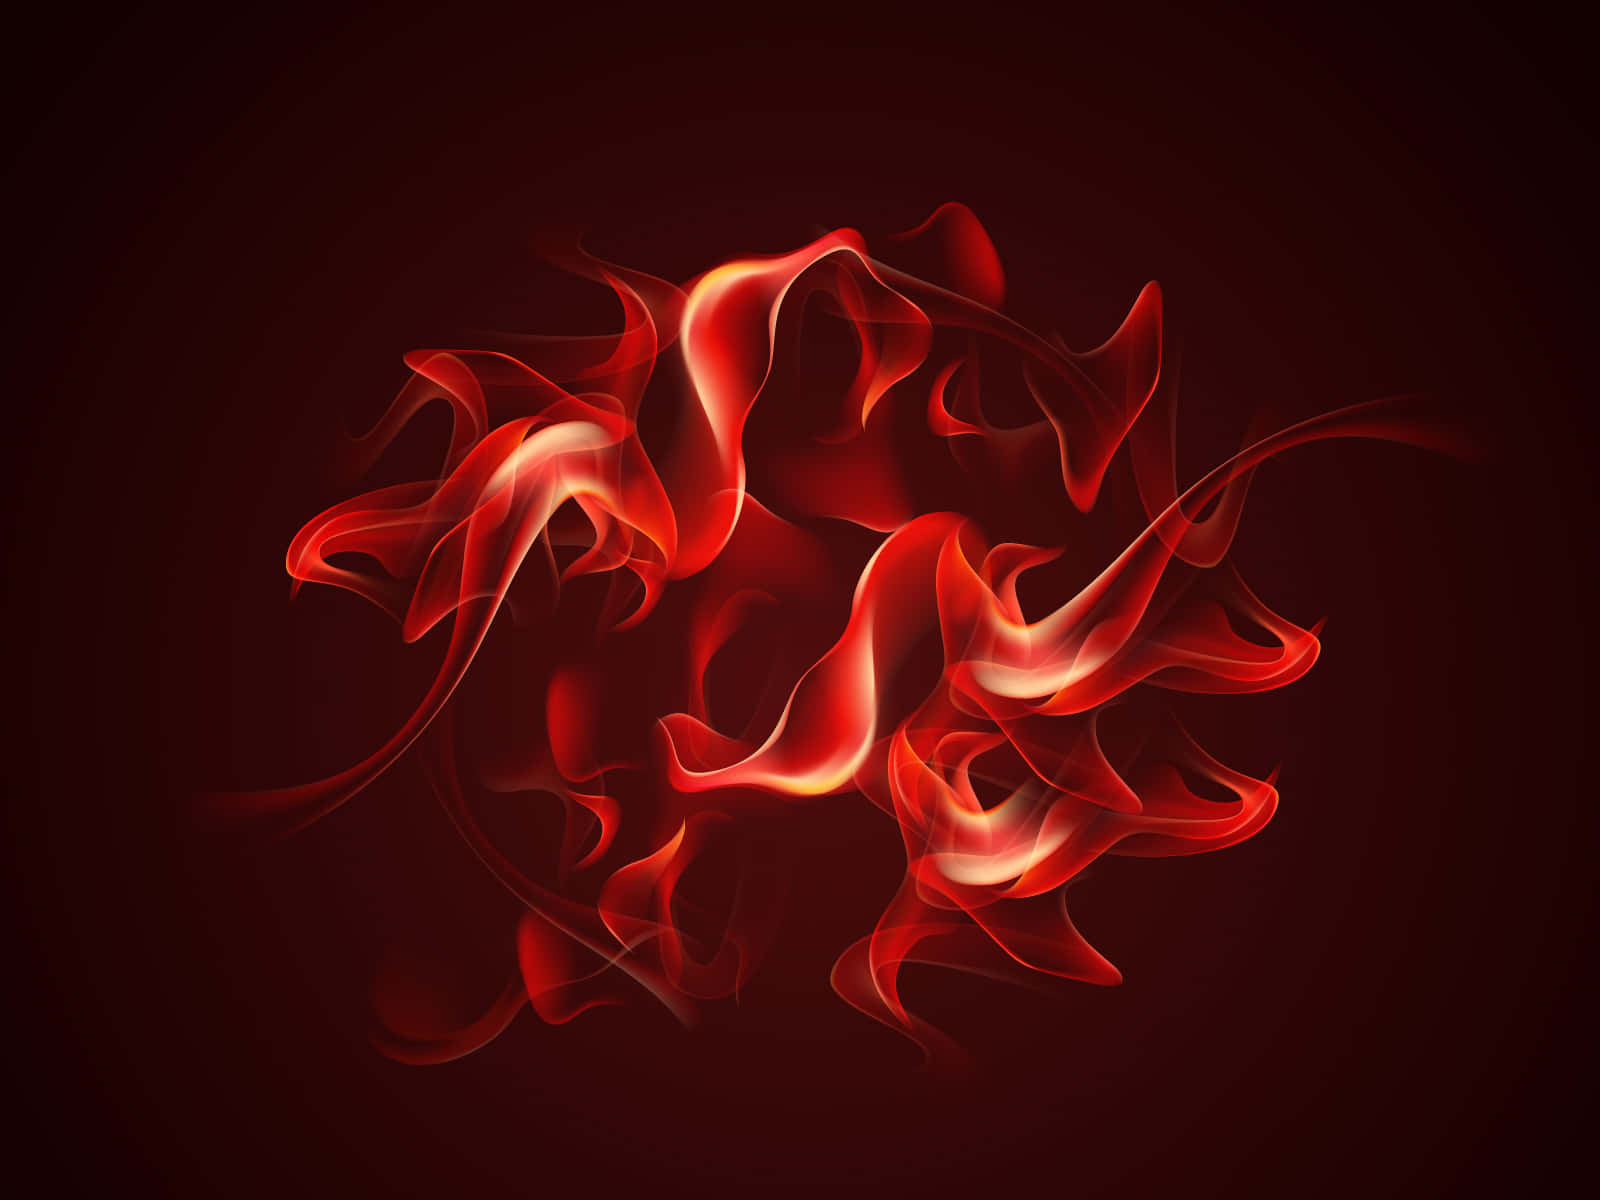 Fiery Passion